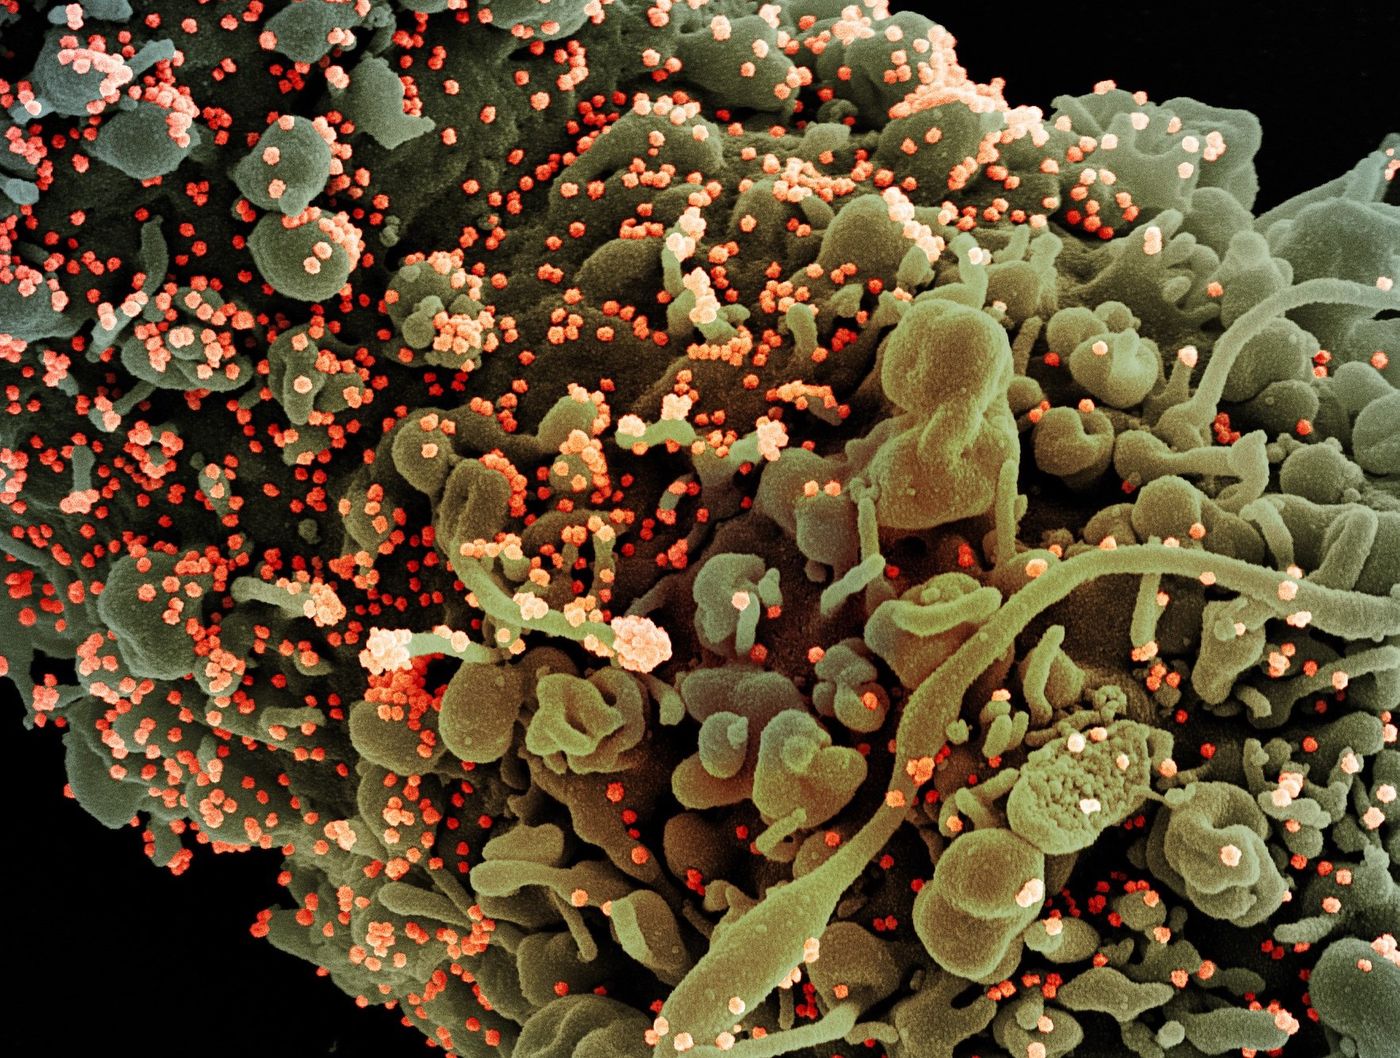 Colorized scanning electron micrograph of a cell showing morphological signs of apoptosis, infected with SARS-COV-2 virus particles (orange), isolated from a patient sample. Image captured at the NIAID Integrated Research Facility (IRF) in Fort Detrick, Maryland. / Credit: NIAID